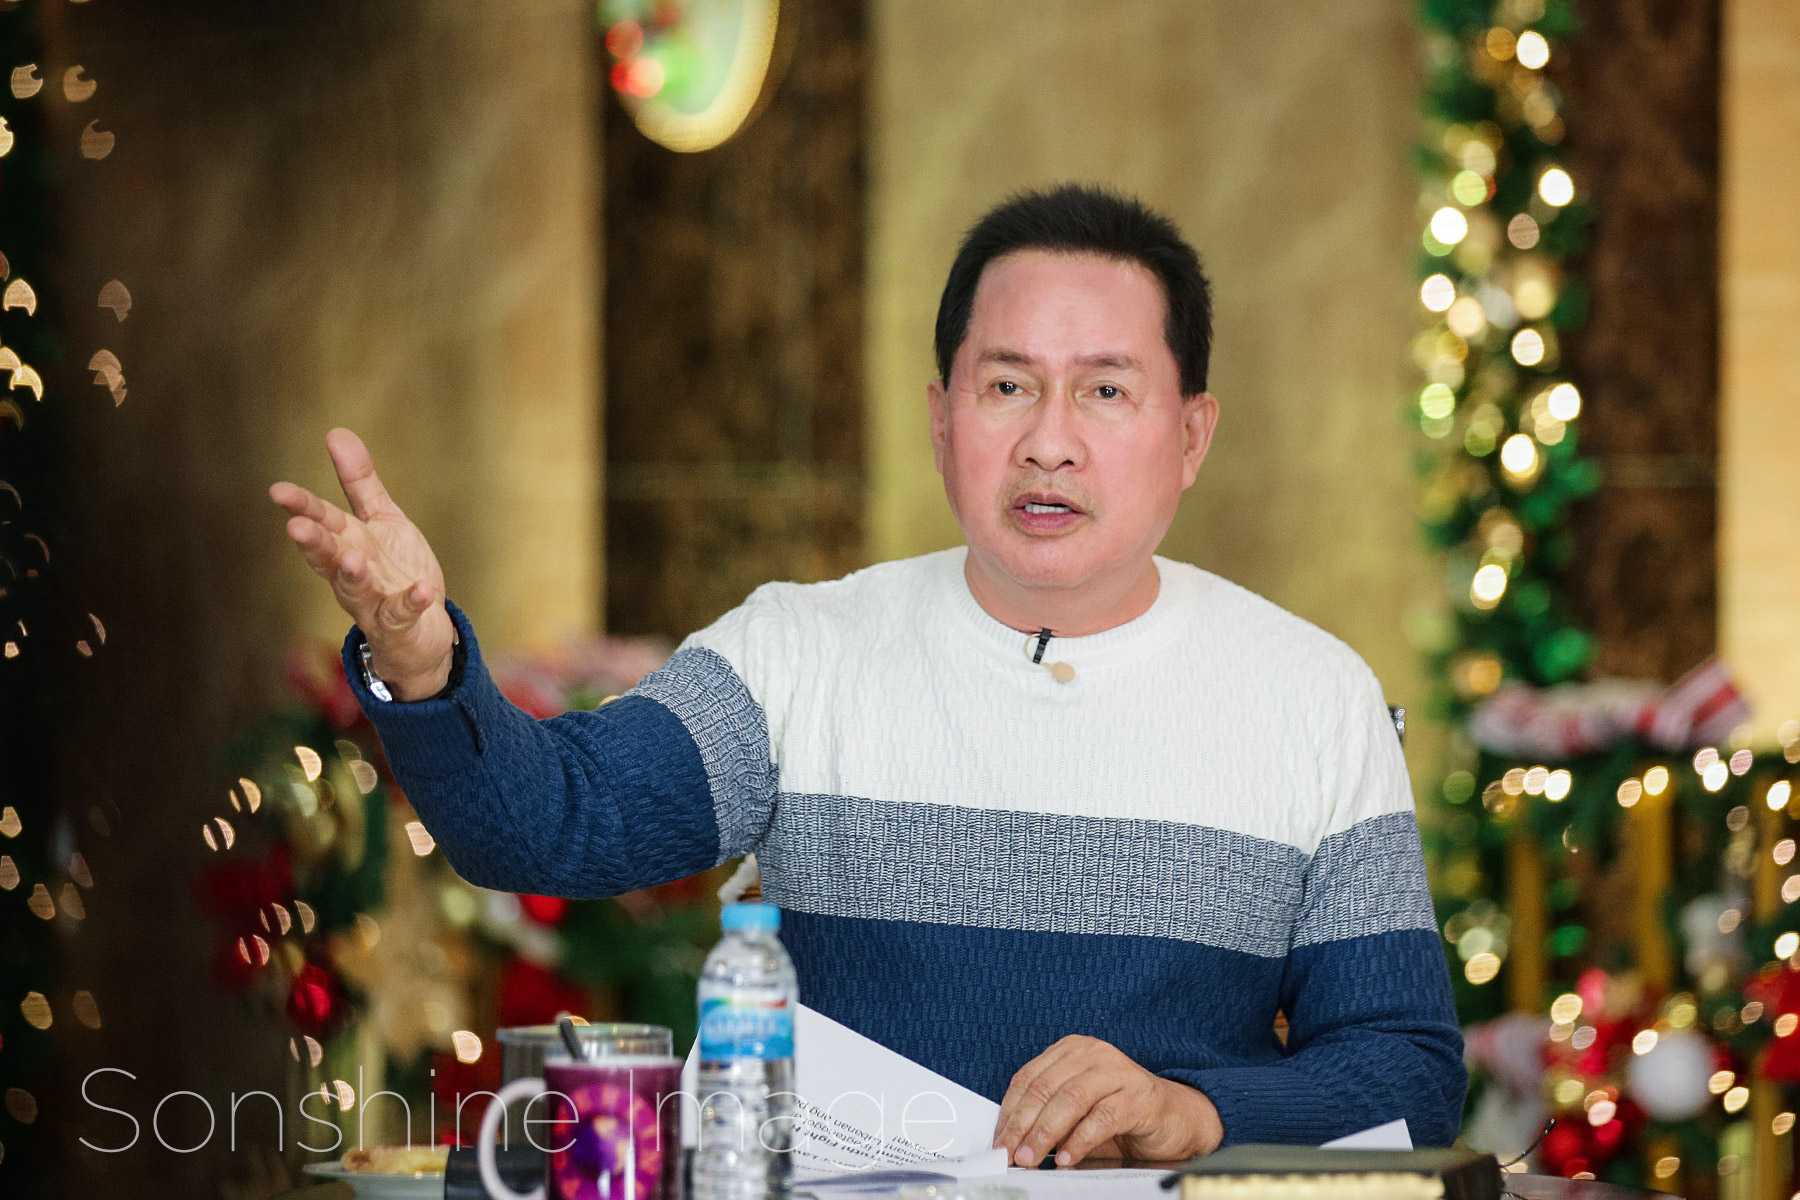 US sanctions Quiboloy for ‘serious human rights abuse’